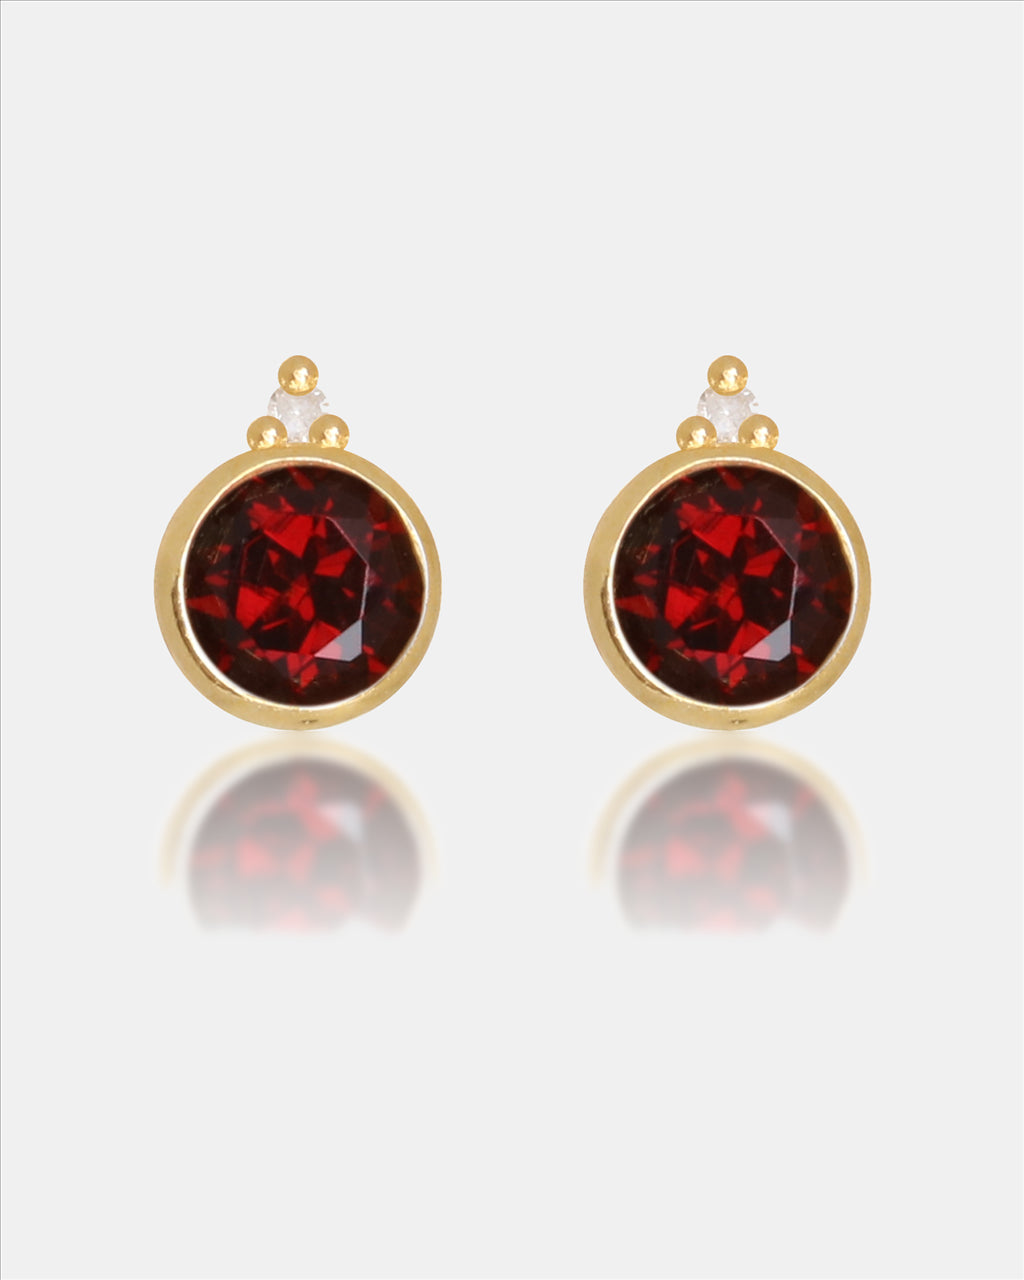 Diamonds By Georgini Natural Garnet And Two Natural Diamond January Earrings Sterling Silver Gold Plate